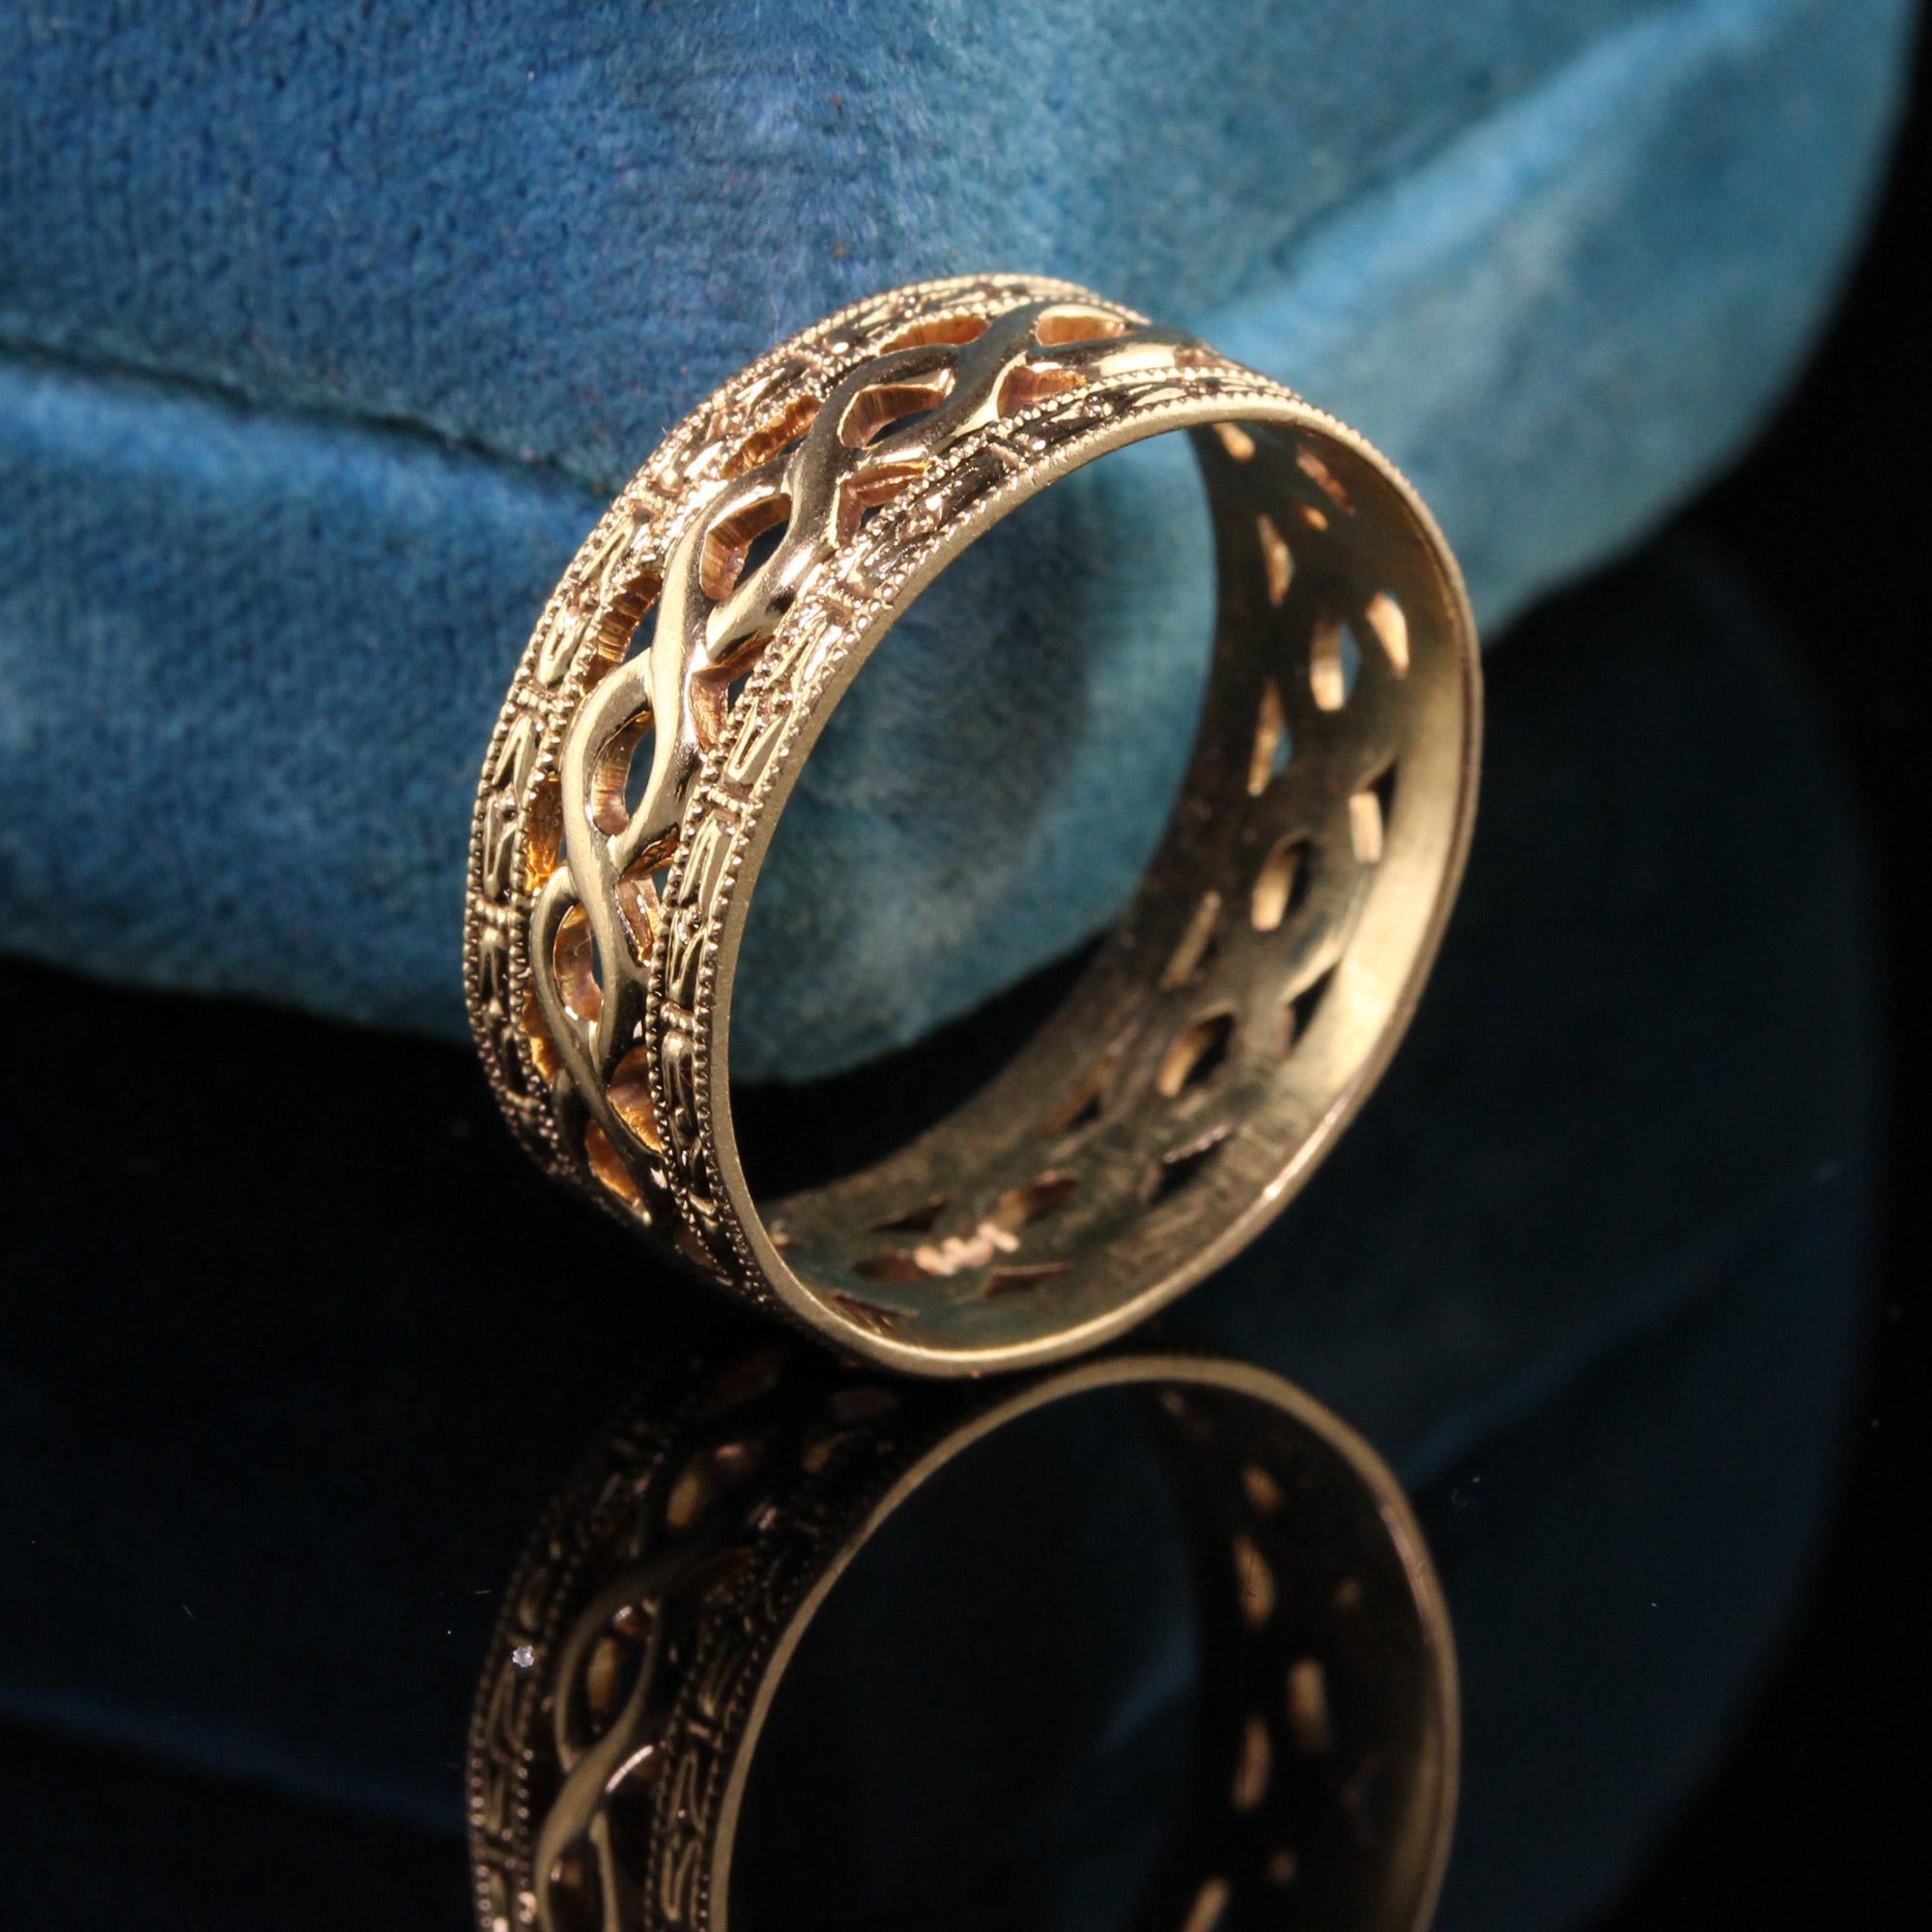 Beautiful Antique Art Deco 14K Yellow Gold Twist Openwork Band - Size 6.75. This beautiful band is in good condition and has clear deep engravings and milgraining going around the ring.

Item #R0854

Metal: 14K Yellow Gold

Weight: 3 Grams

Ring